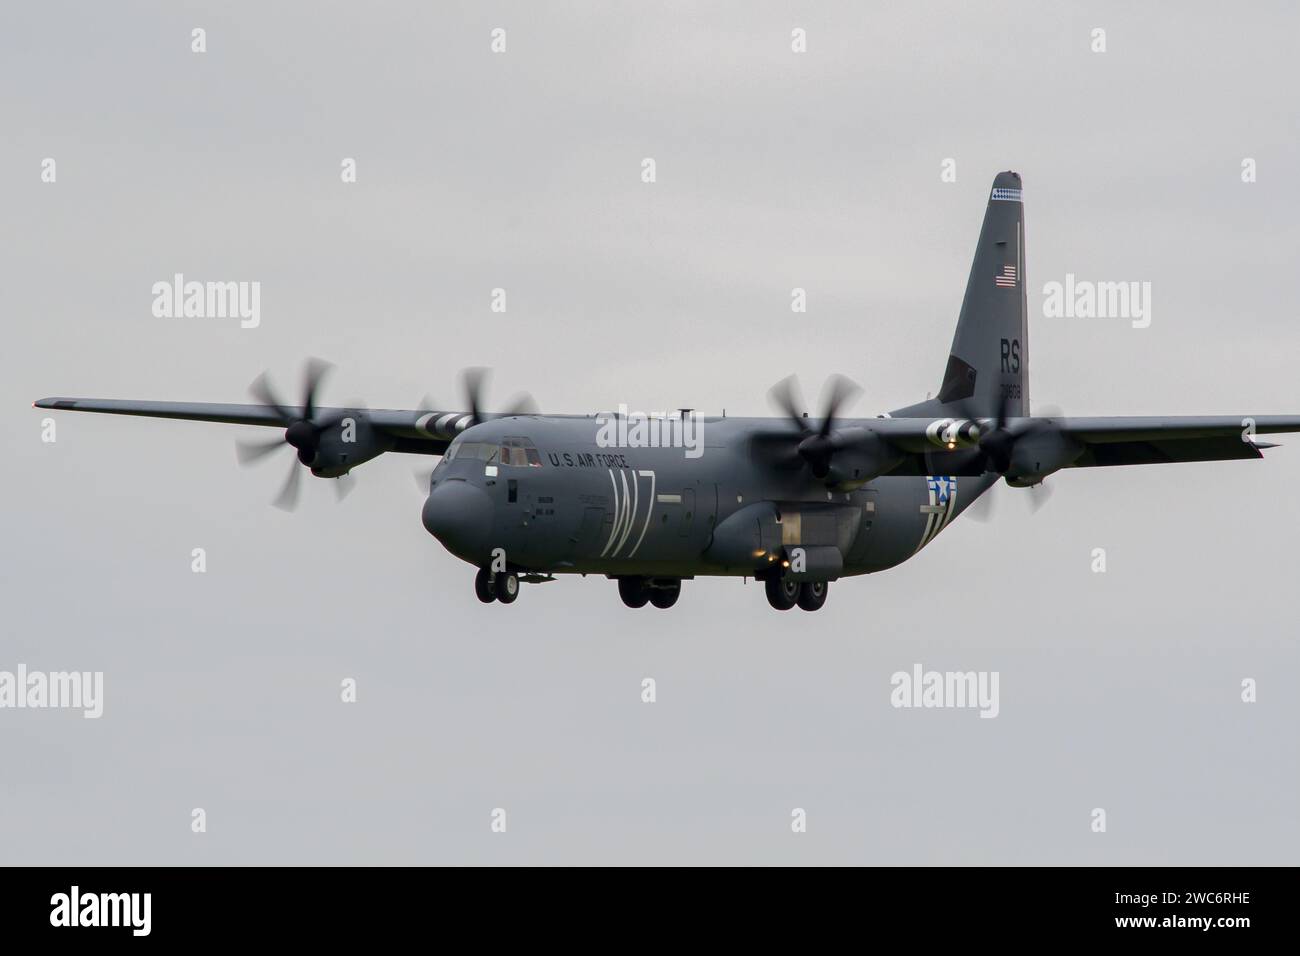 US Air Force Lockheed C-130 Hercules military transport aircraft landing in Lviv Airport after a training flight Stock Photo